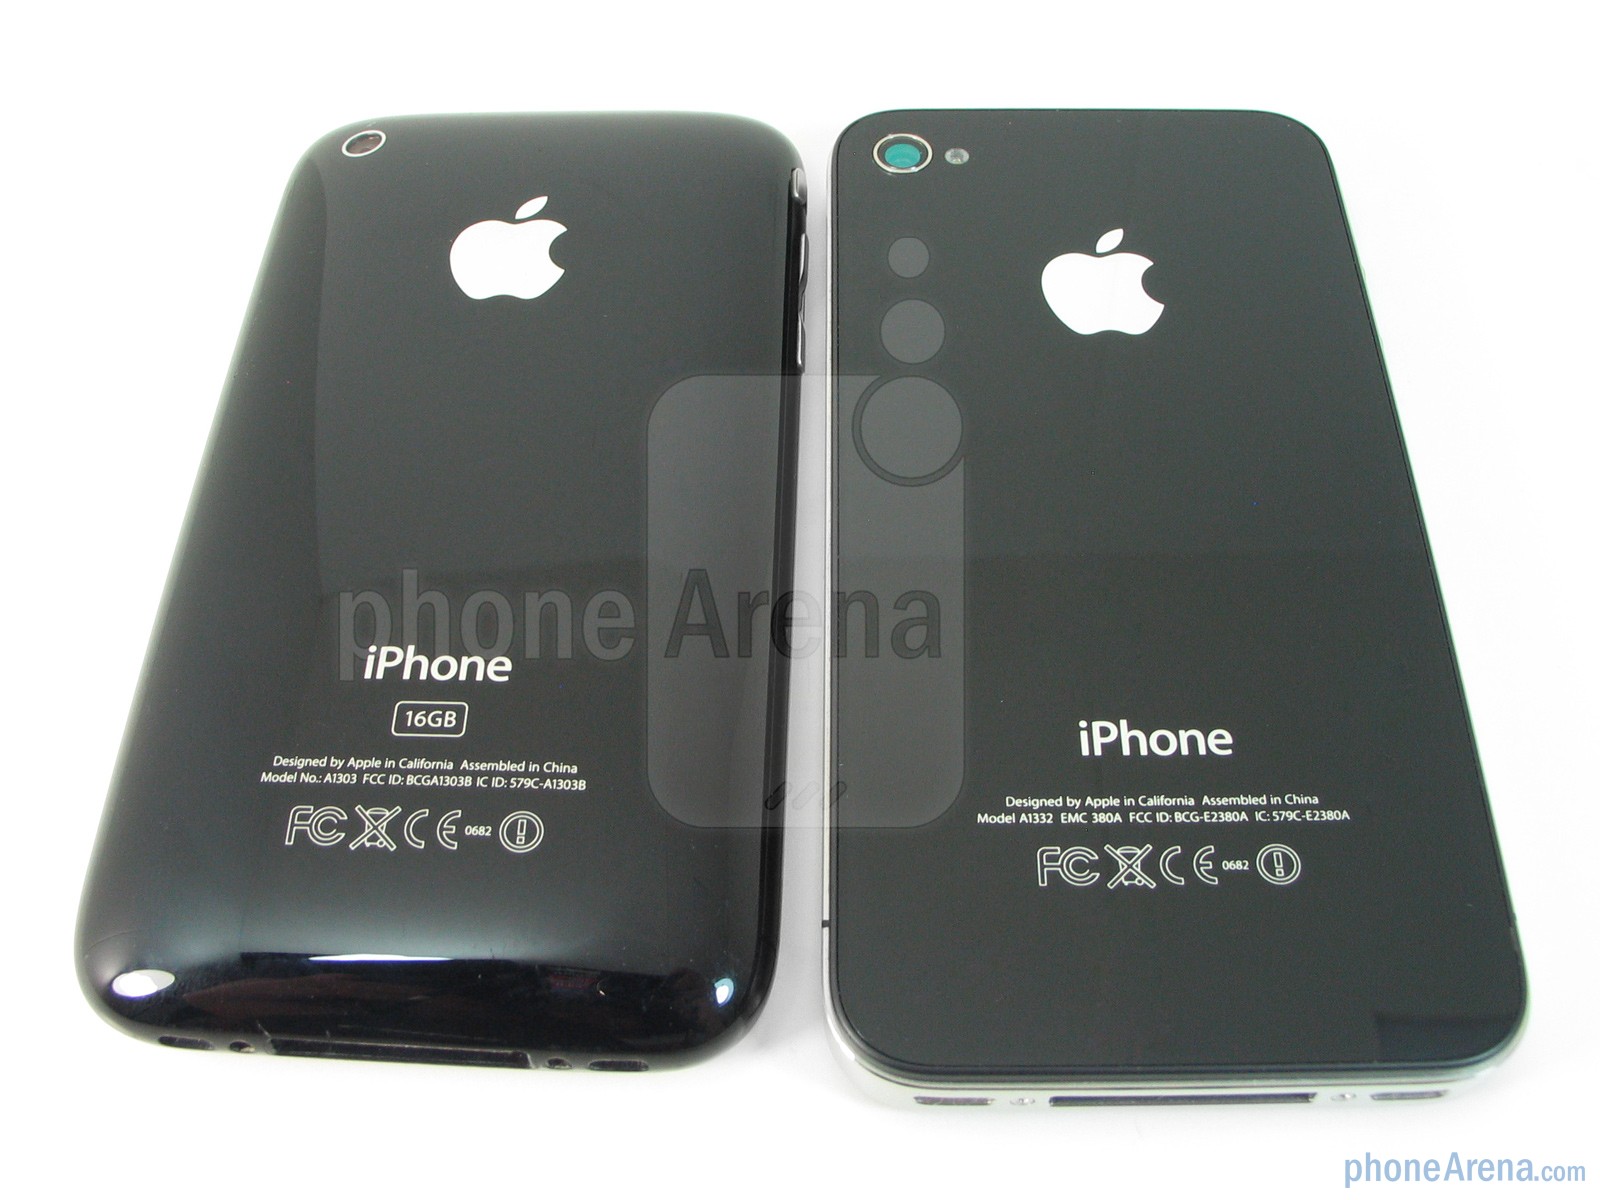 The Apple Iphone 4 And The Apple Iphone 3gs (left, - Iphone 4 - HD Wallpaper 